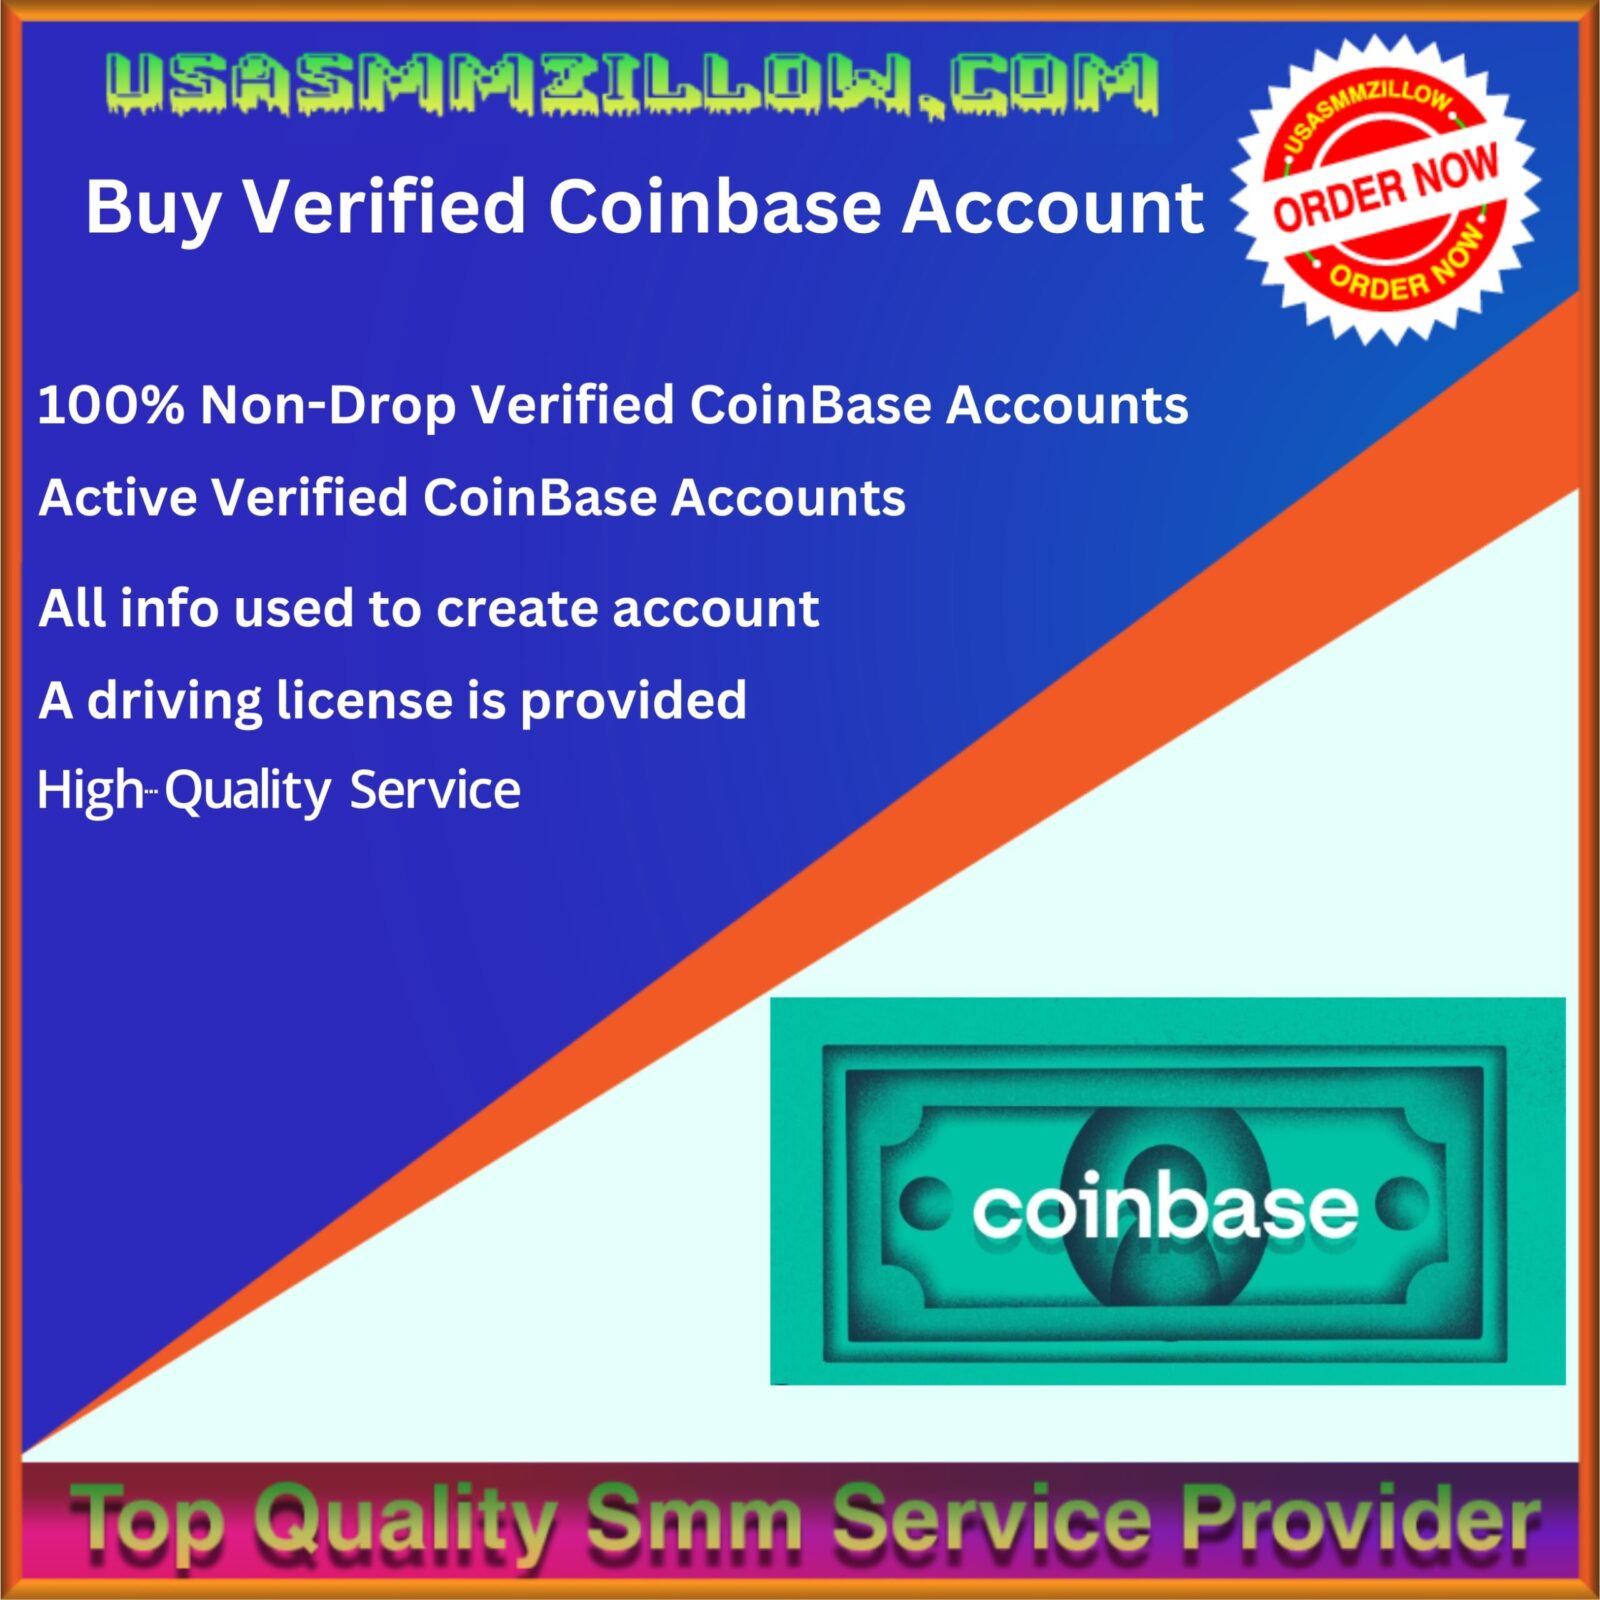 Buy Verified Coinbase Account - 100% Secure and Low Price